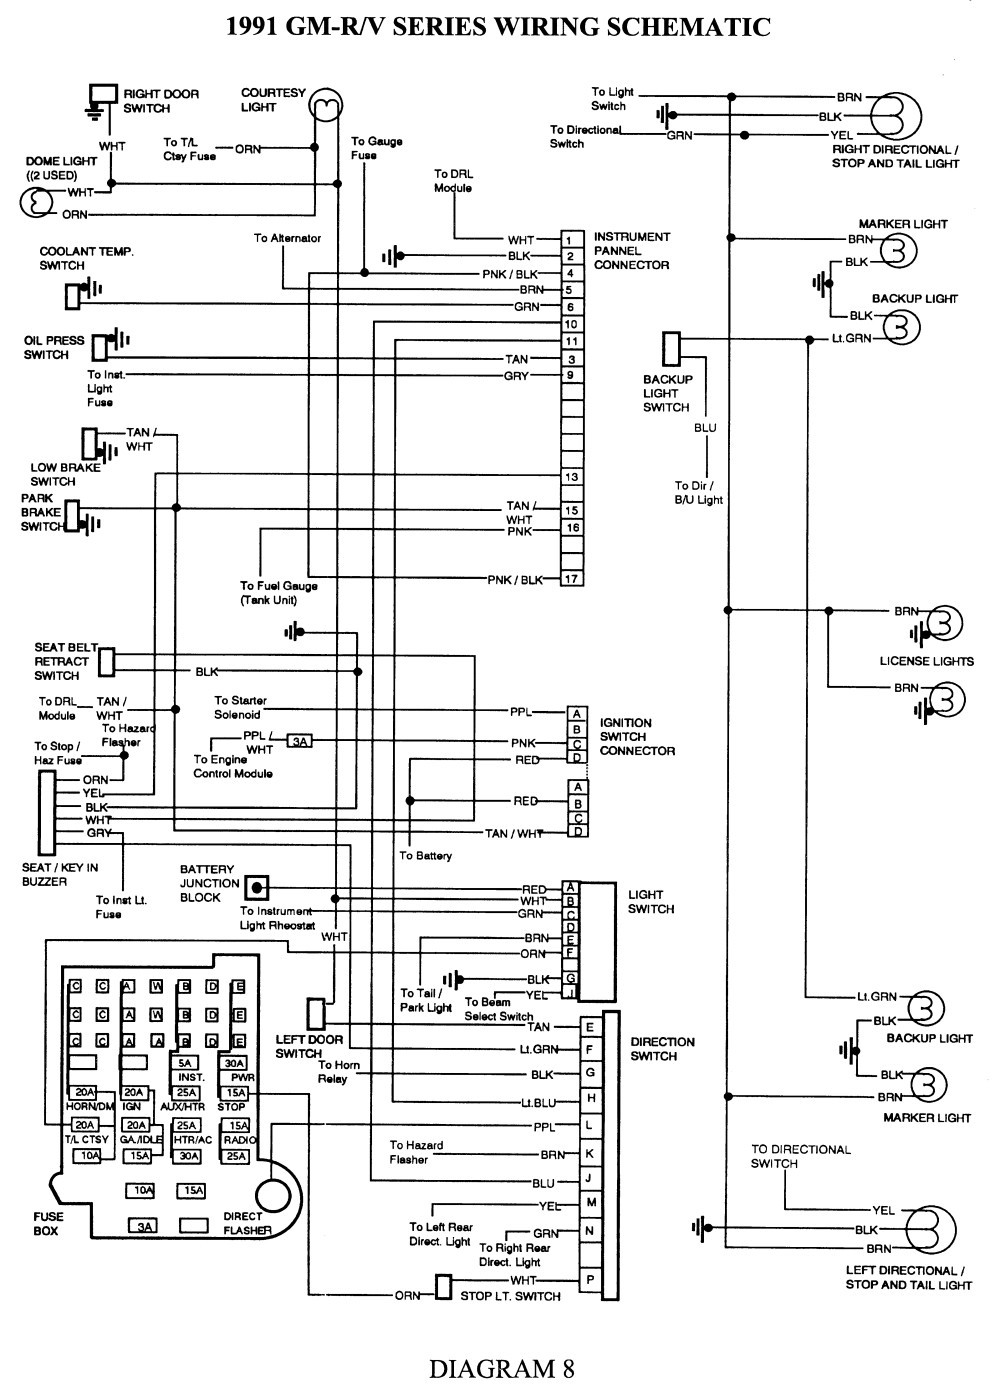 2002 Chevy Suburban Stereo Wiring Diagram from mainetreasurechest.com